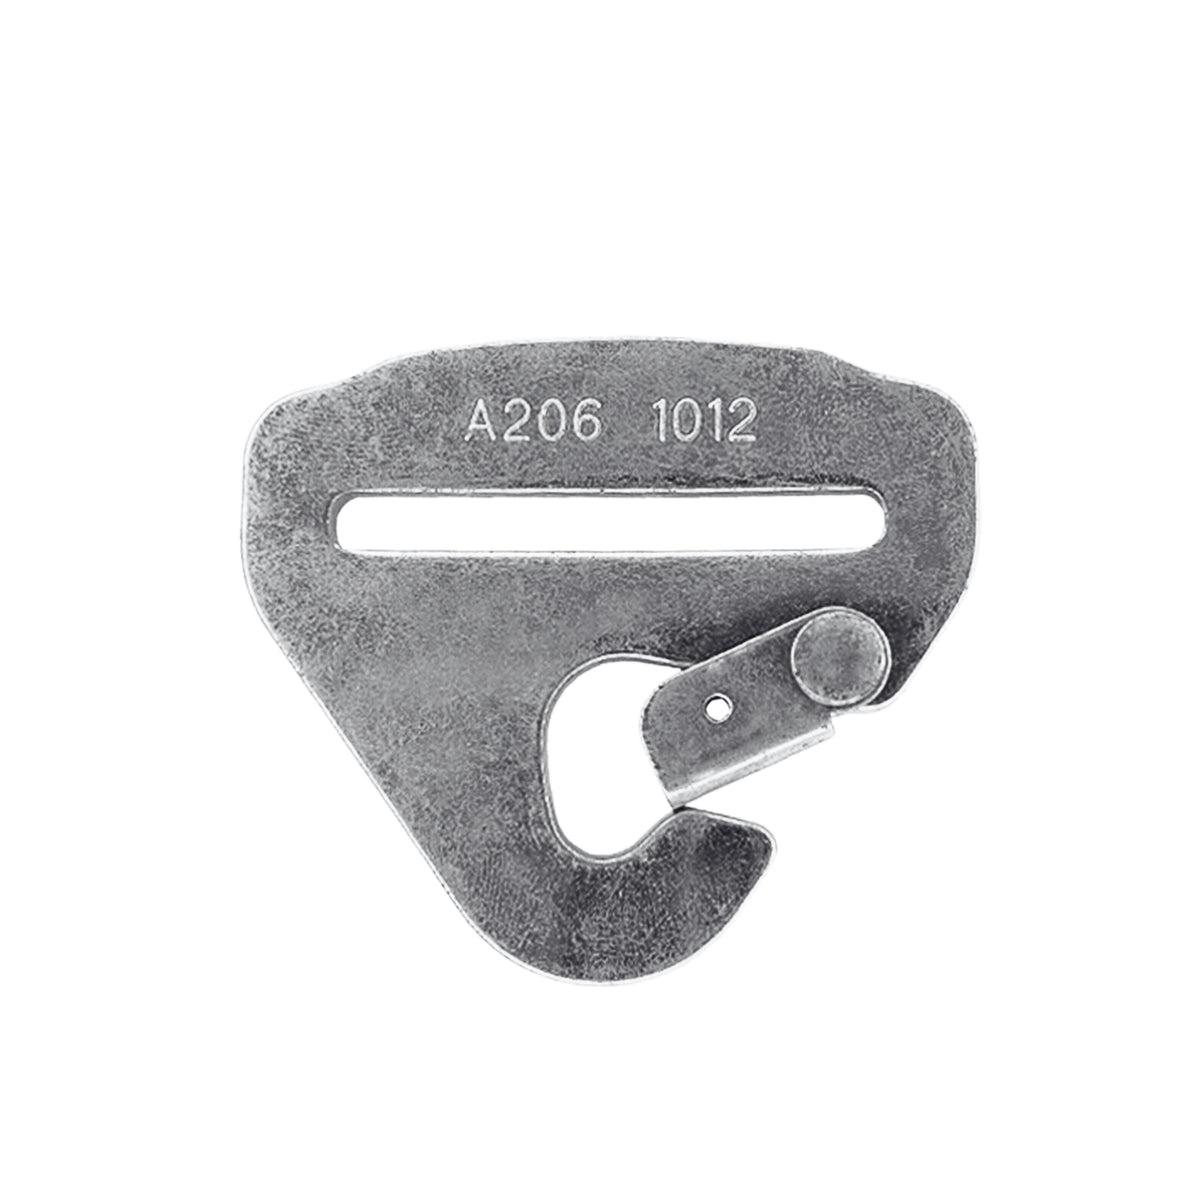 2" / 50 MM Snap Hook With Keeper